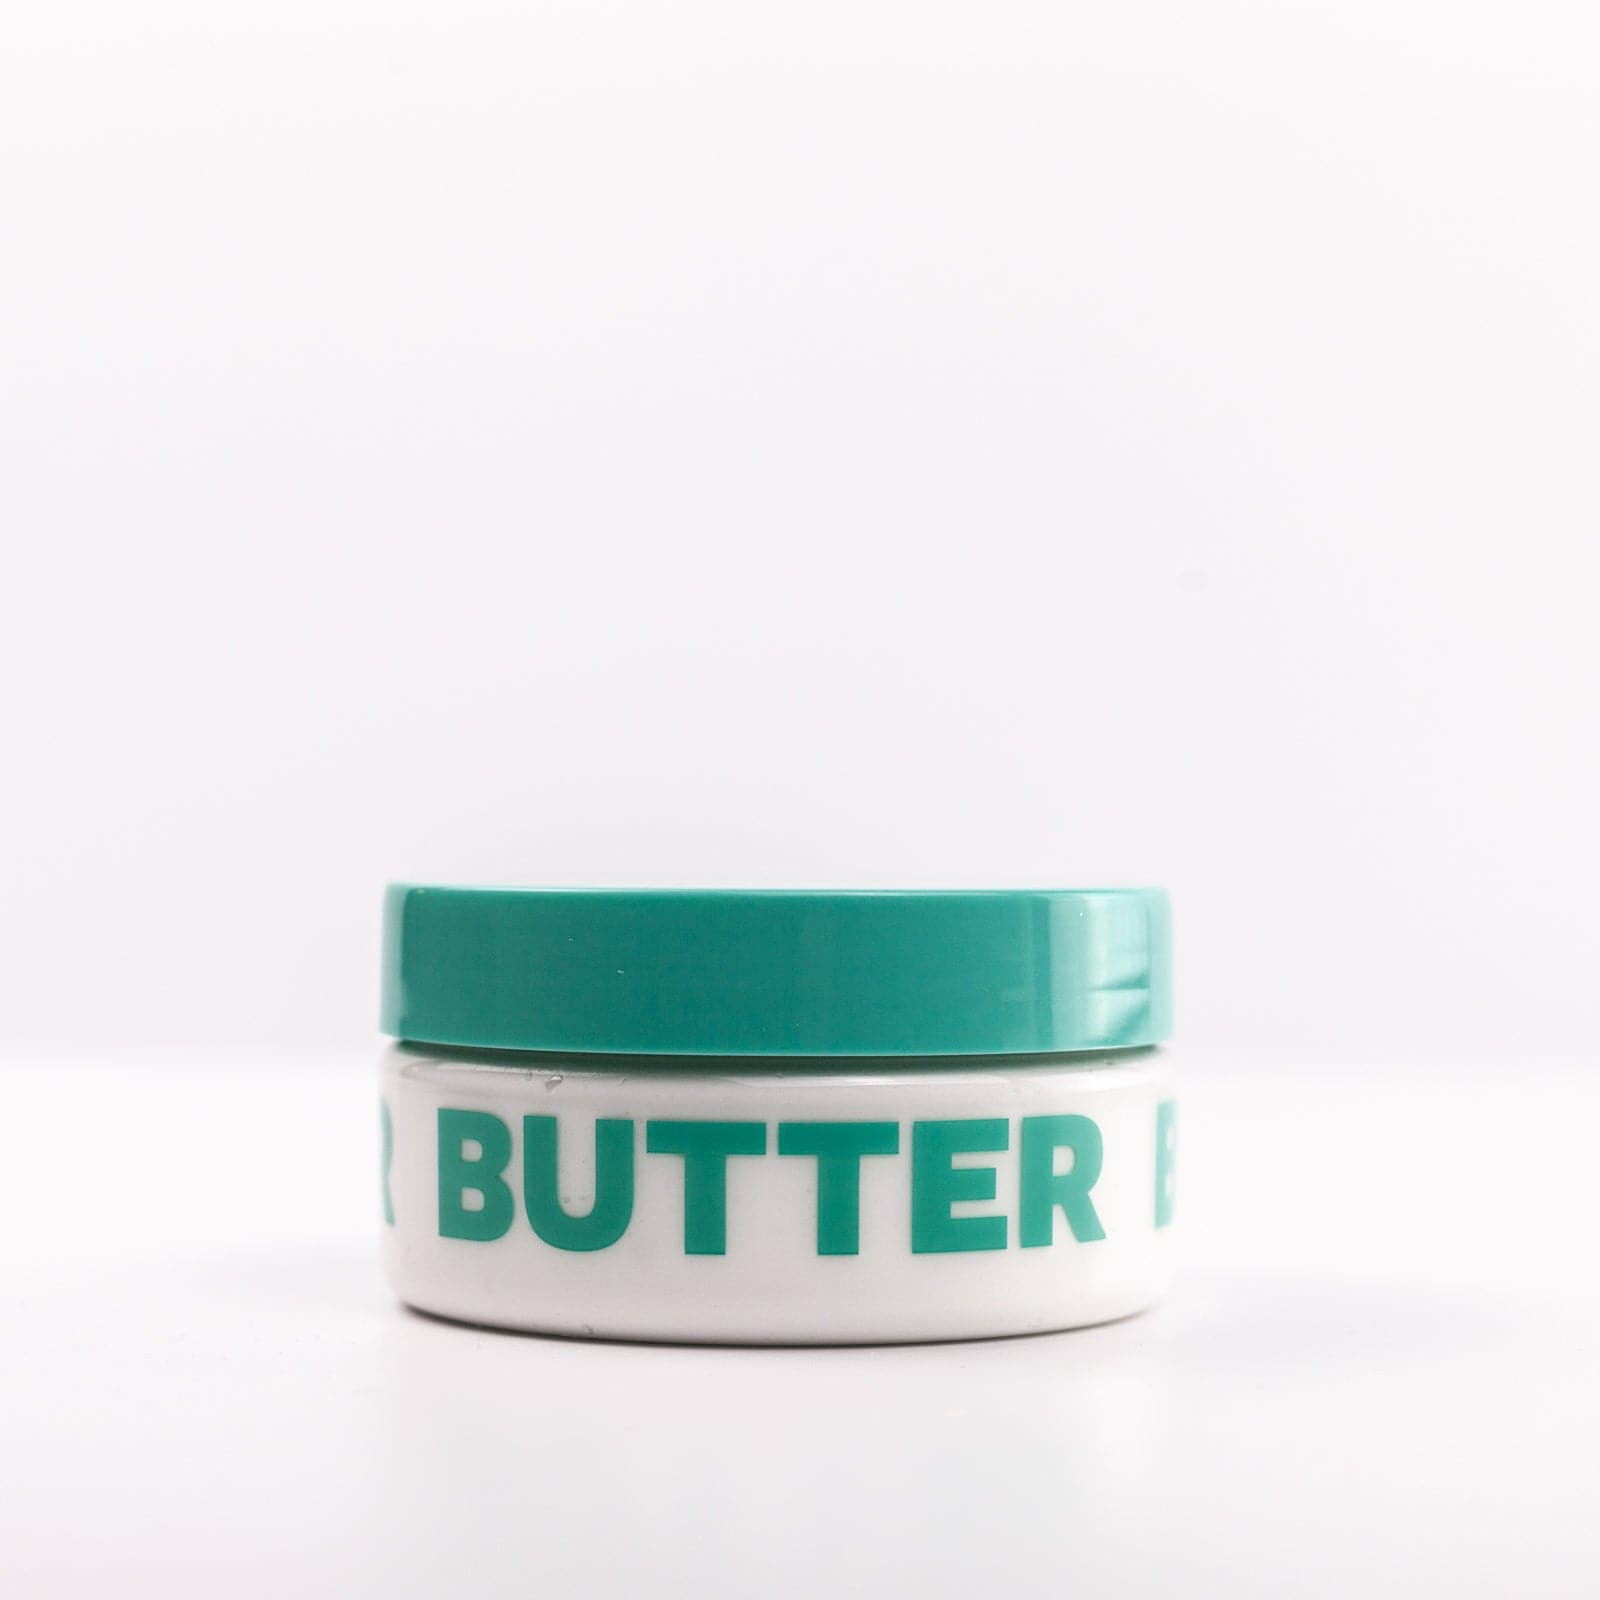 Clear Body Butter container with teal lid and lettering against white background